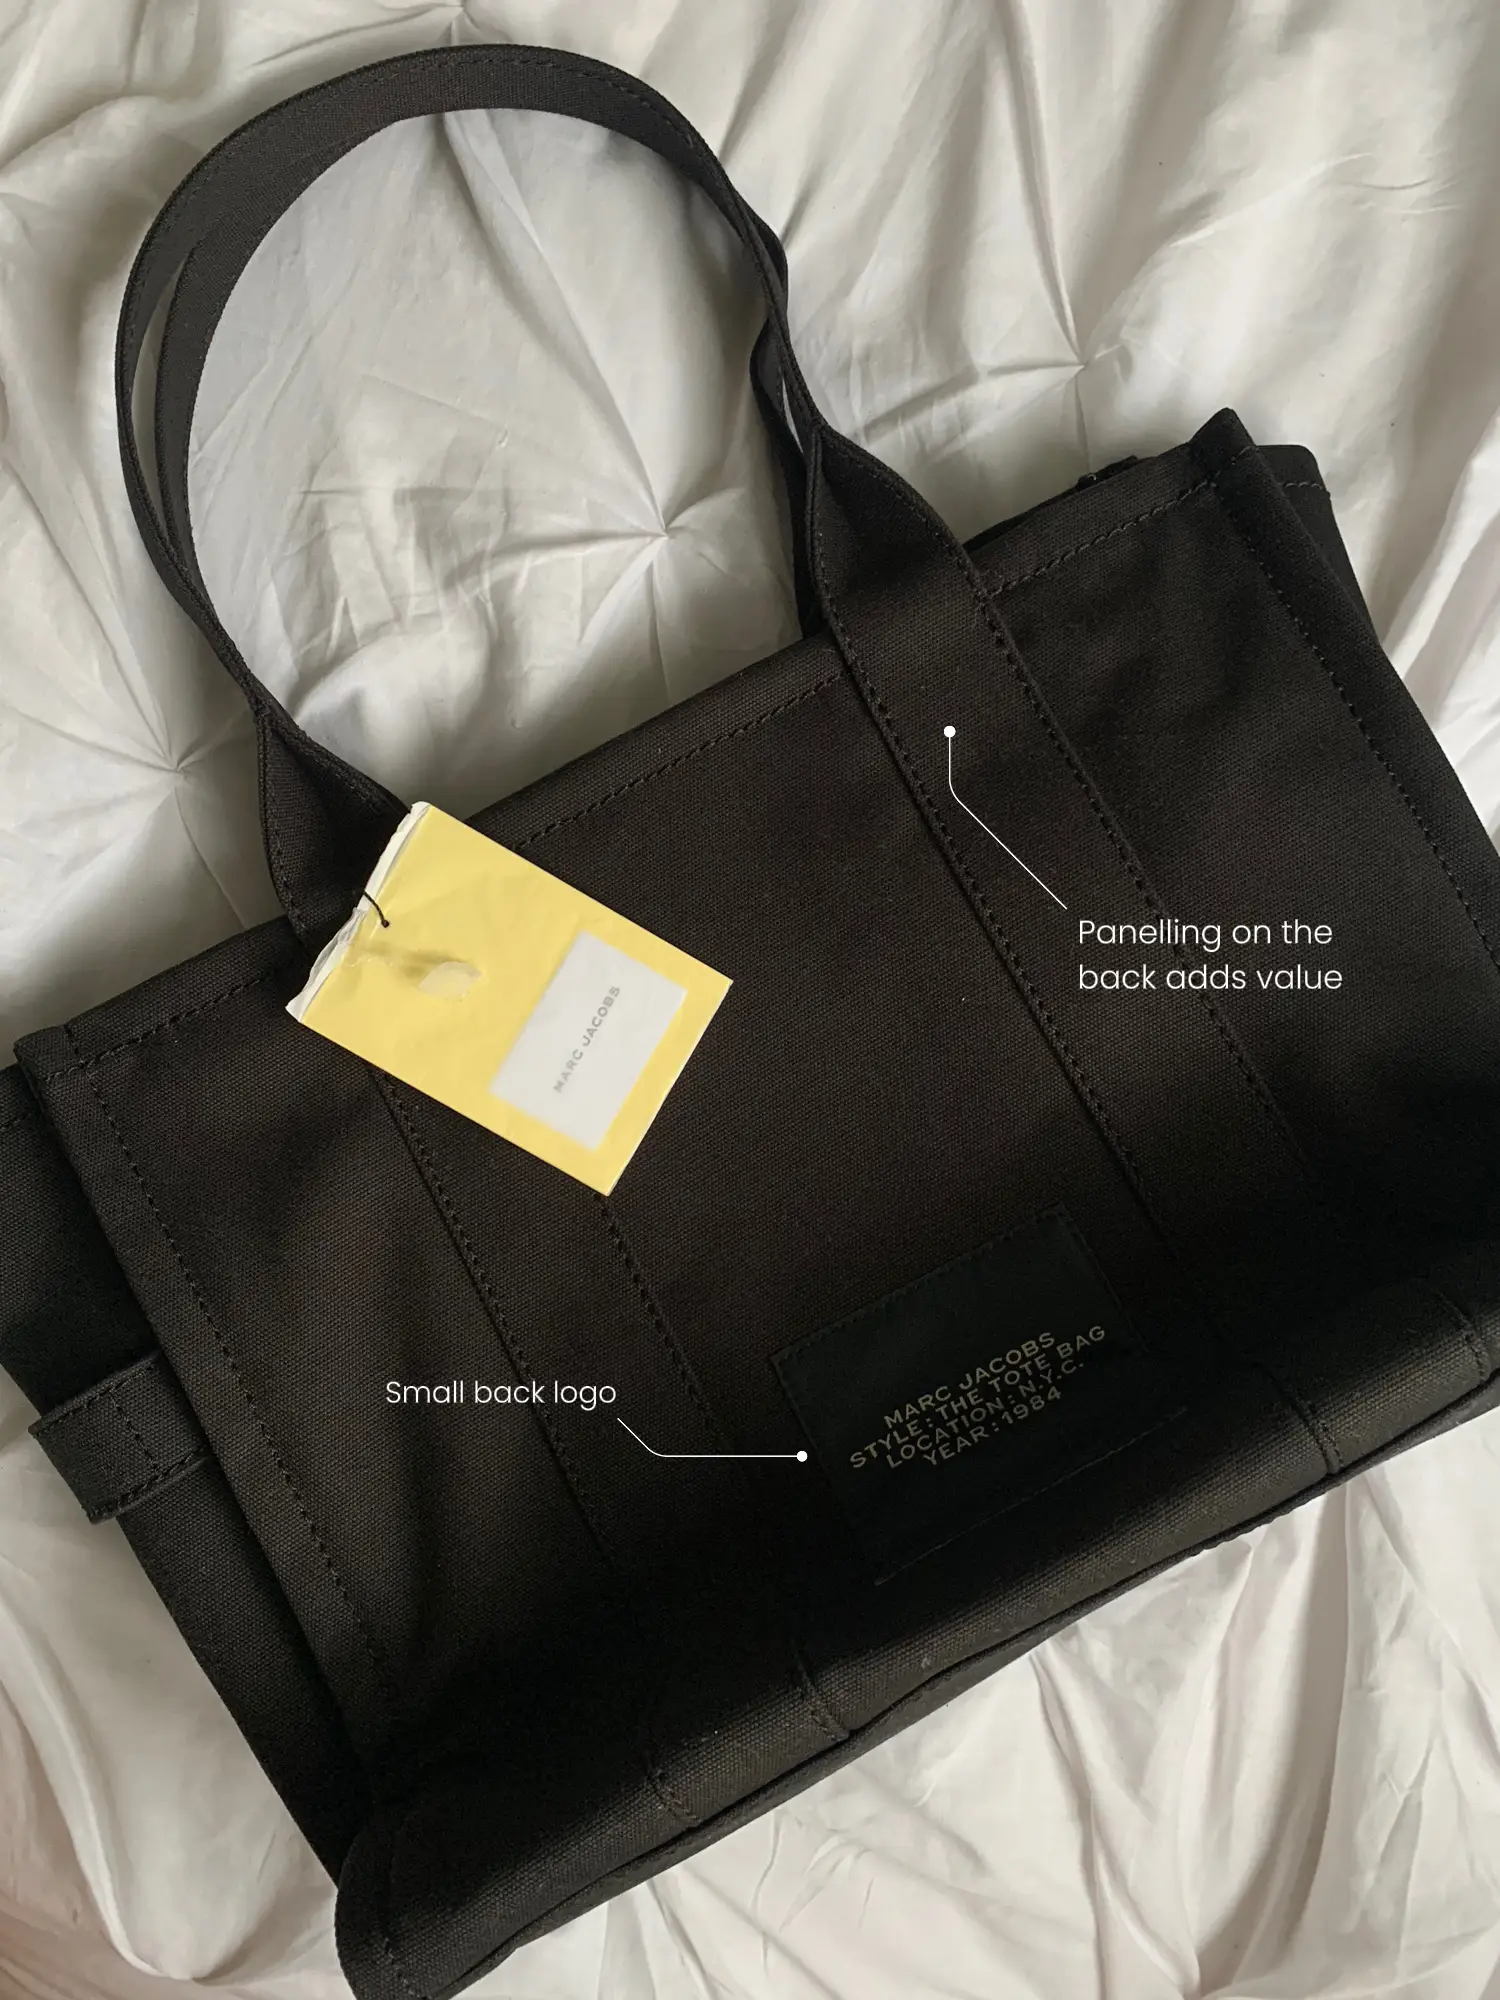 Reviewing 3 Sizes of the Marc Jacobs Tote Bag, Gallery posted by IamJamila